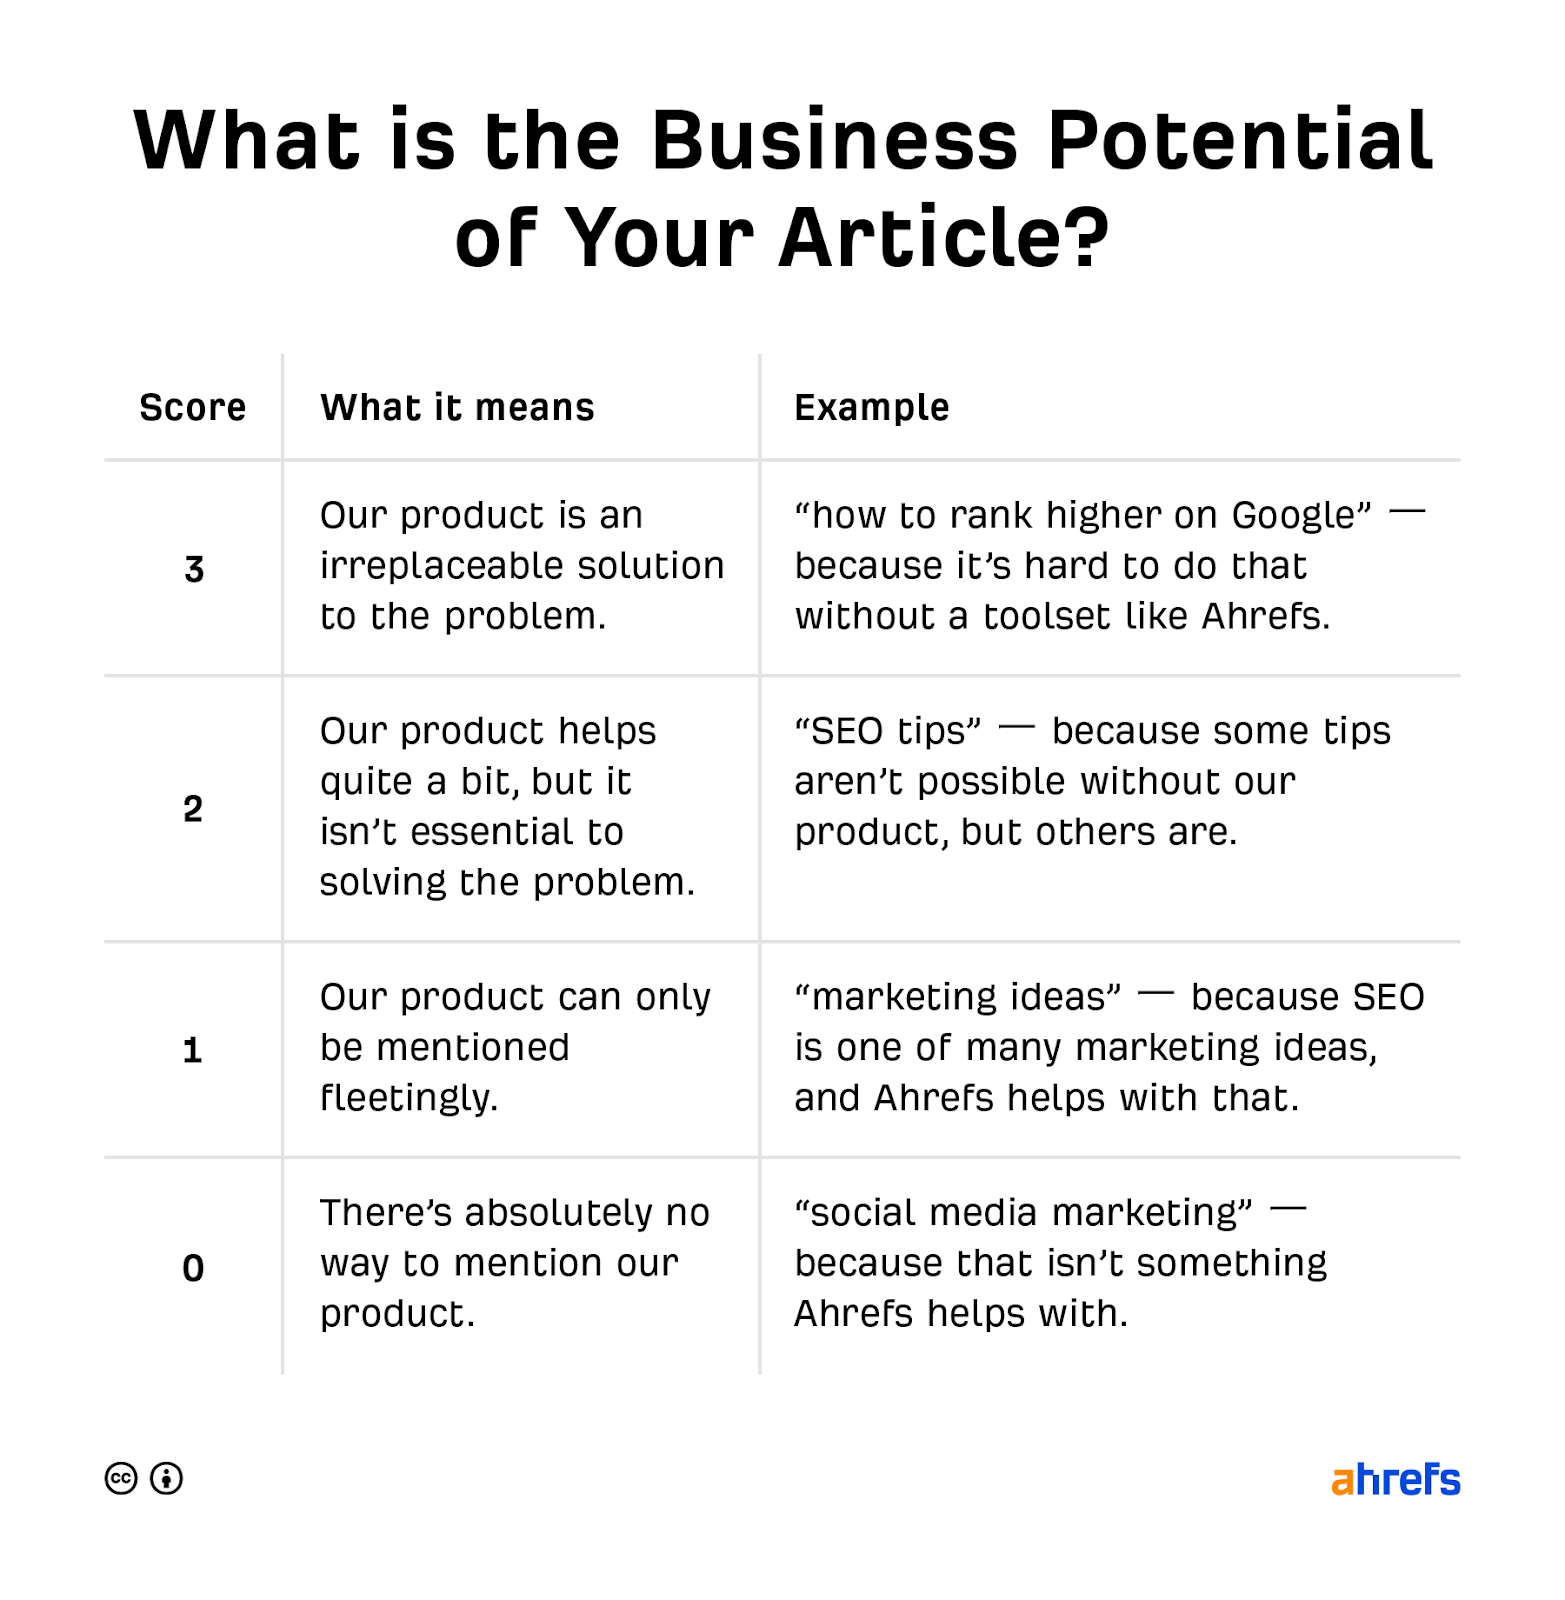 Potential scoring of business